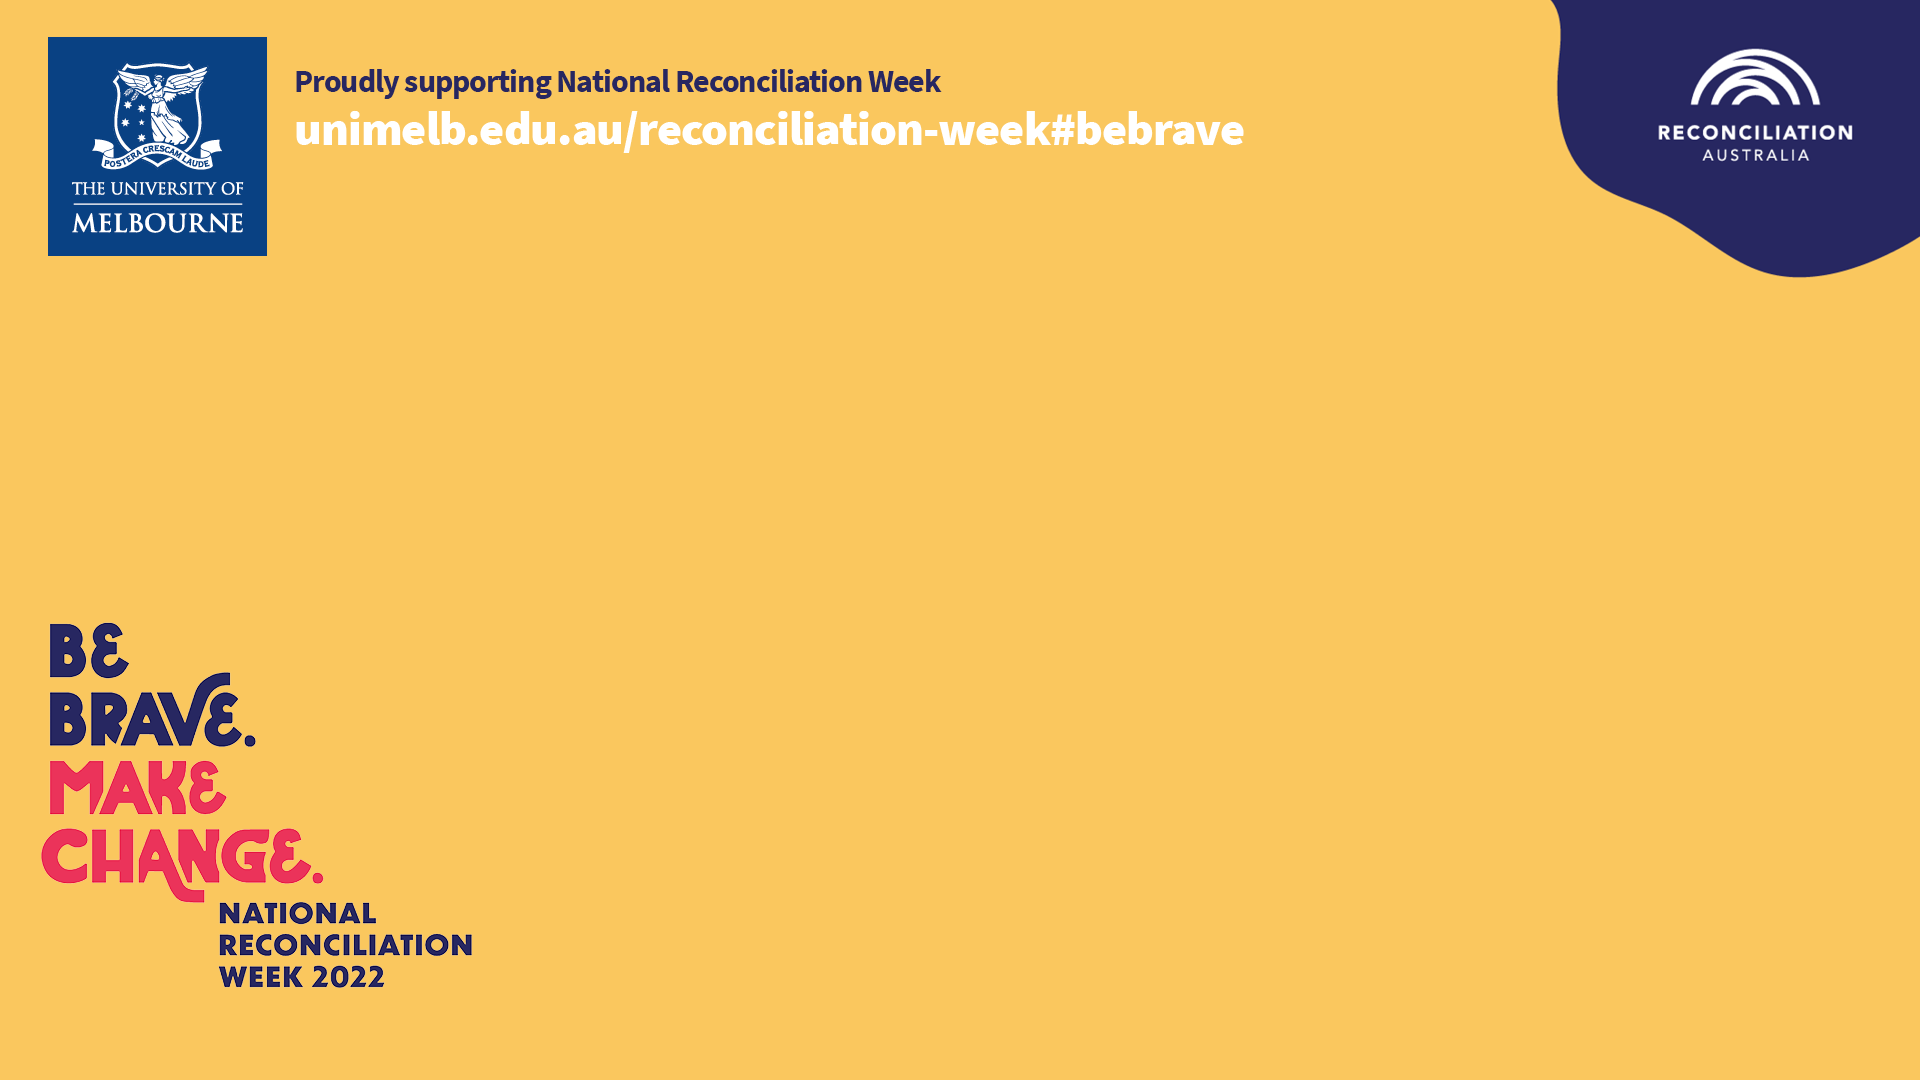 Zoom background screen image, with yellow background, NRW branding and the words "University of Melbourne proudly supporting National Reconciliation Week"